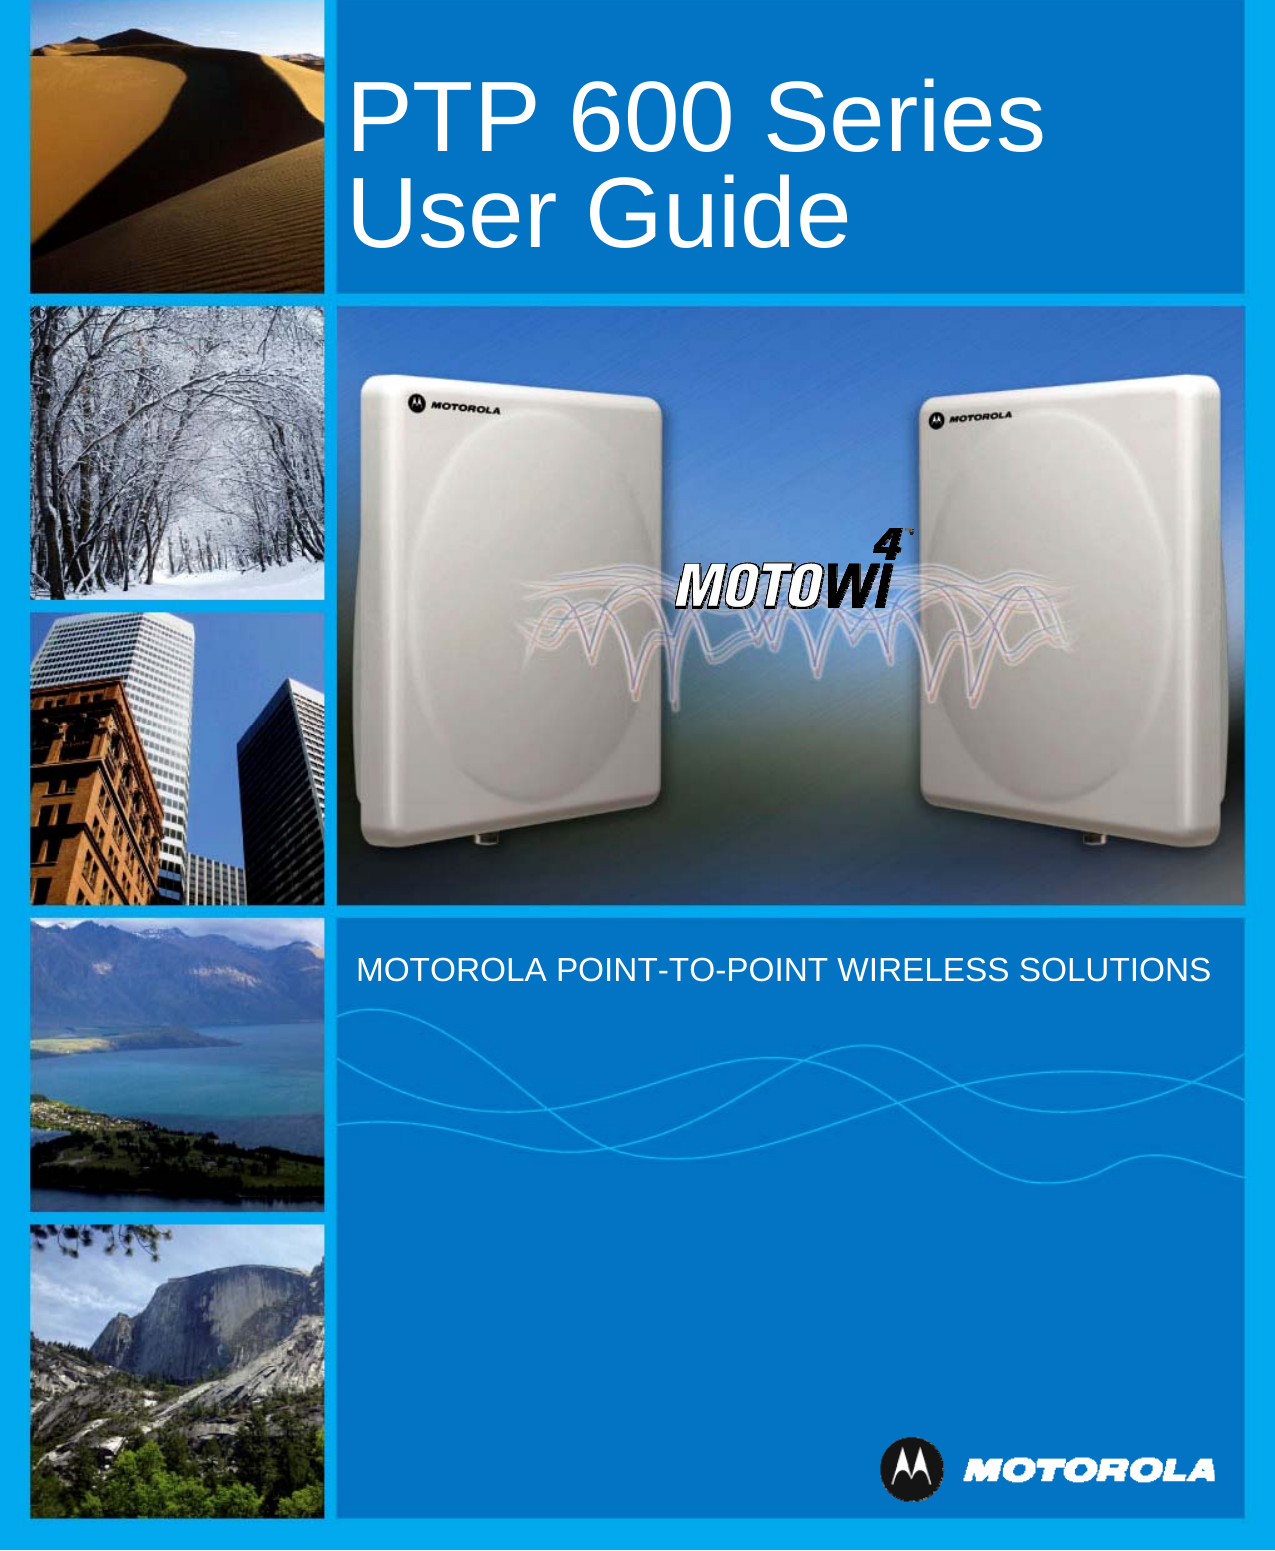 PTP 600 SeriesUser Guide  MOTOROLA POINT-TO-POINT WIRELESS SOLUTIONS  